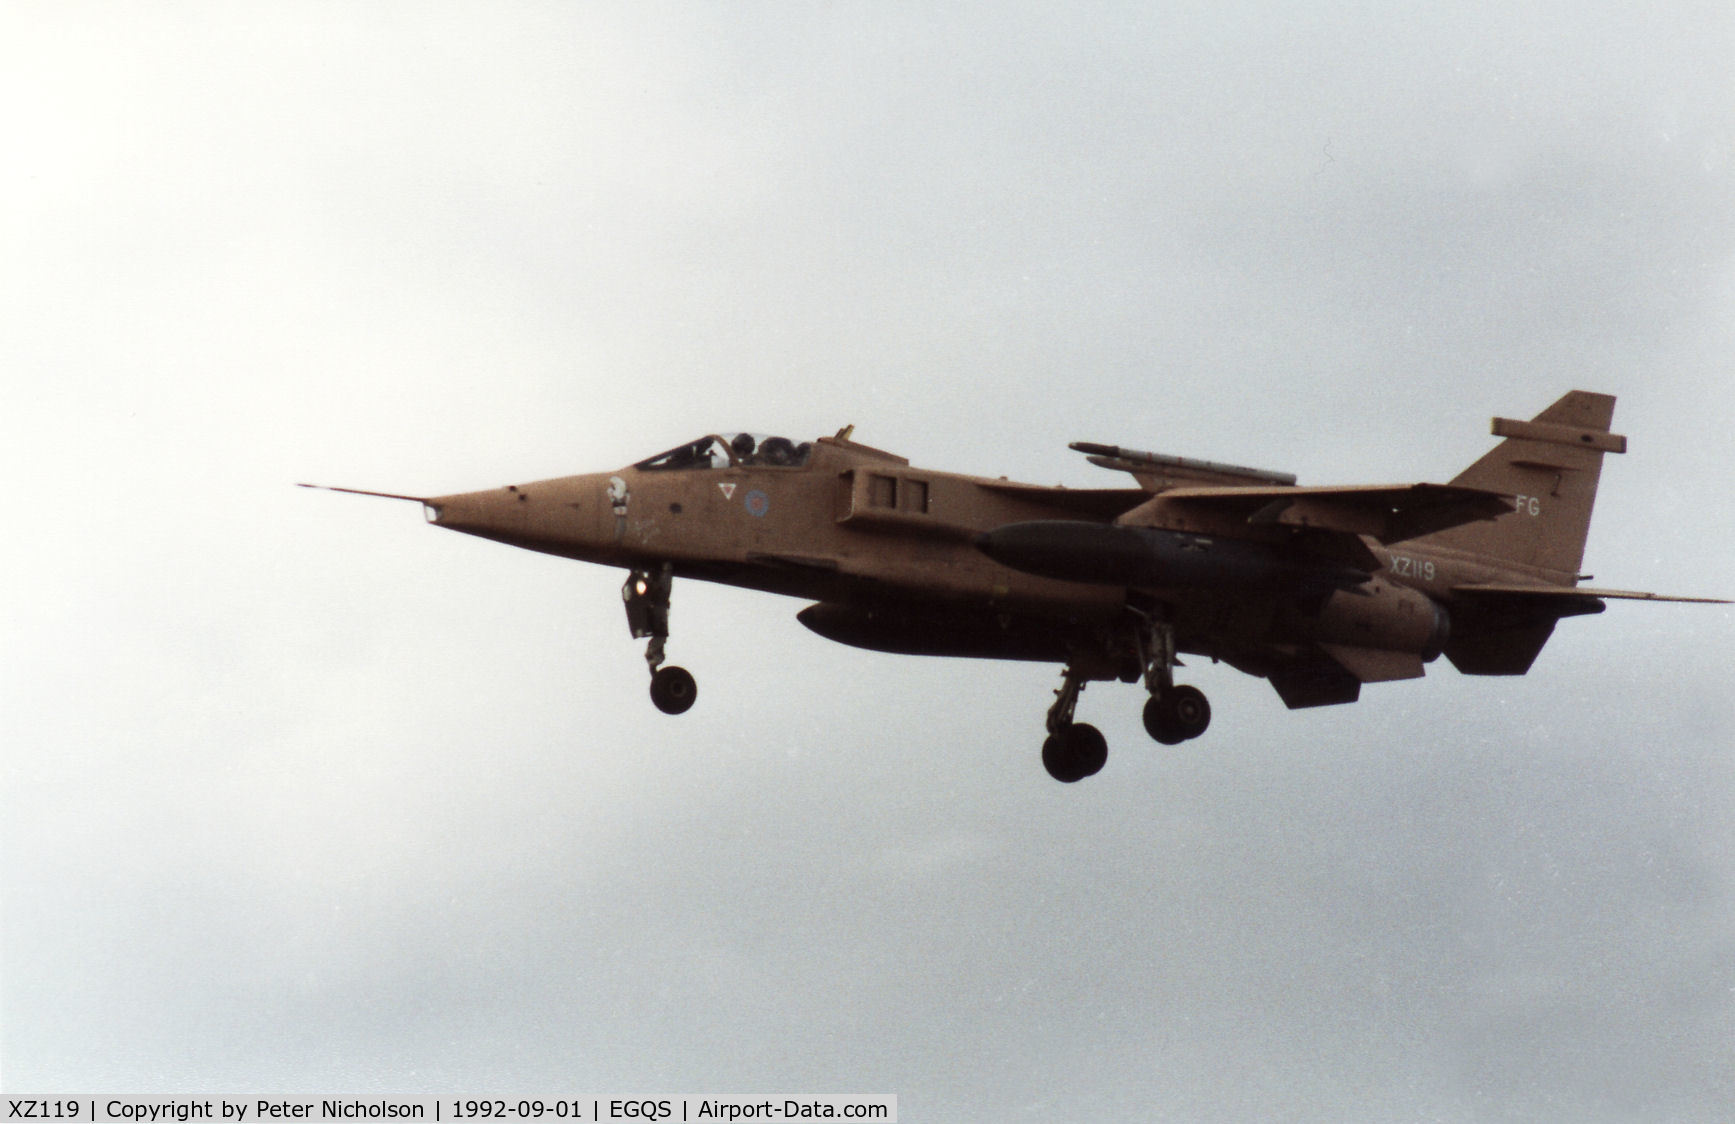 XZ119, 1976 Sepecat Jaguar GR.1A C/N S.120, Jaguar GR.1A named Katrina Jane of 41 Squadron based at RAF Coltishall landing at RAF Lossiemouth in September 1992.  The aircraft is now preserved at the National Museum of Flight at East Fortune.